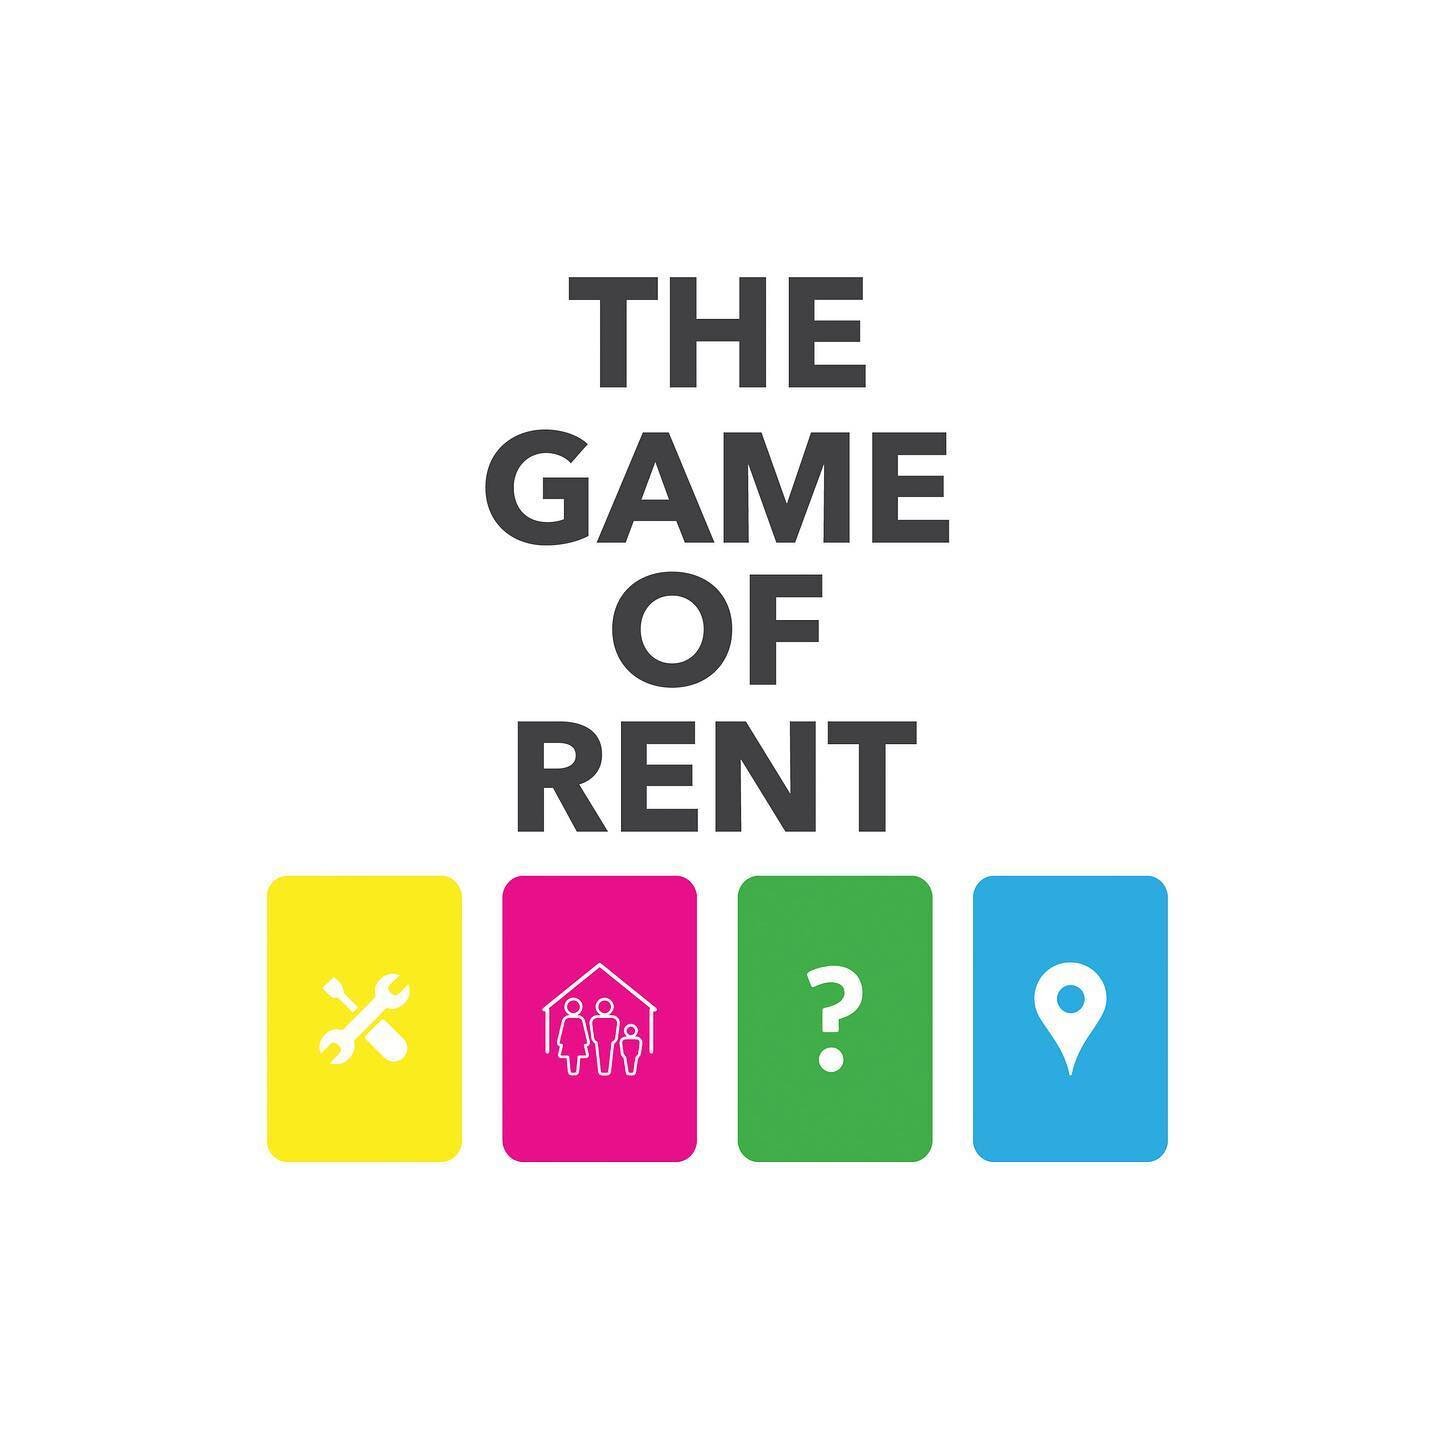 The Game of Rent is a board game created by Kelsey Oesmann from Urban Housing Solutions in Nashville. The goal of the game is to help educate people on the issues and struggles surrounding finding affordable housing in major US cities. Jaden Hicks te